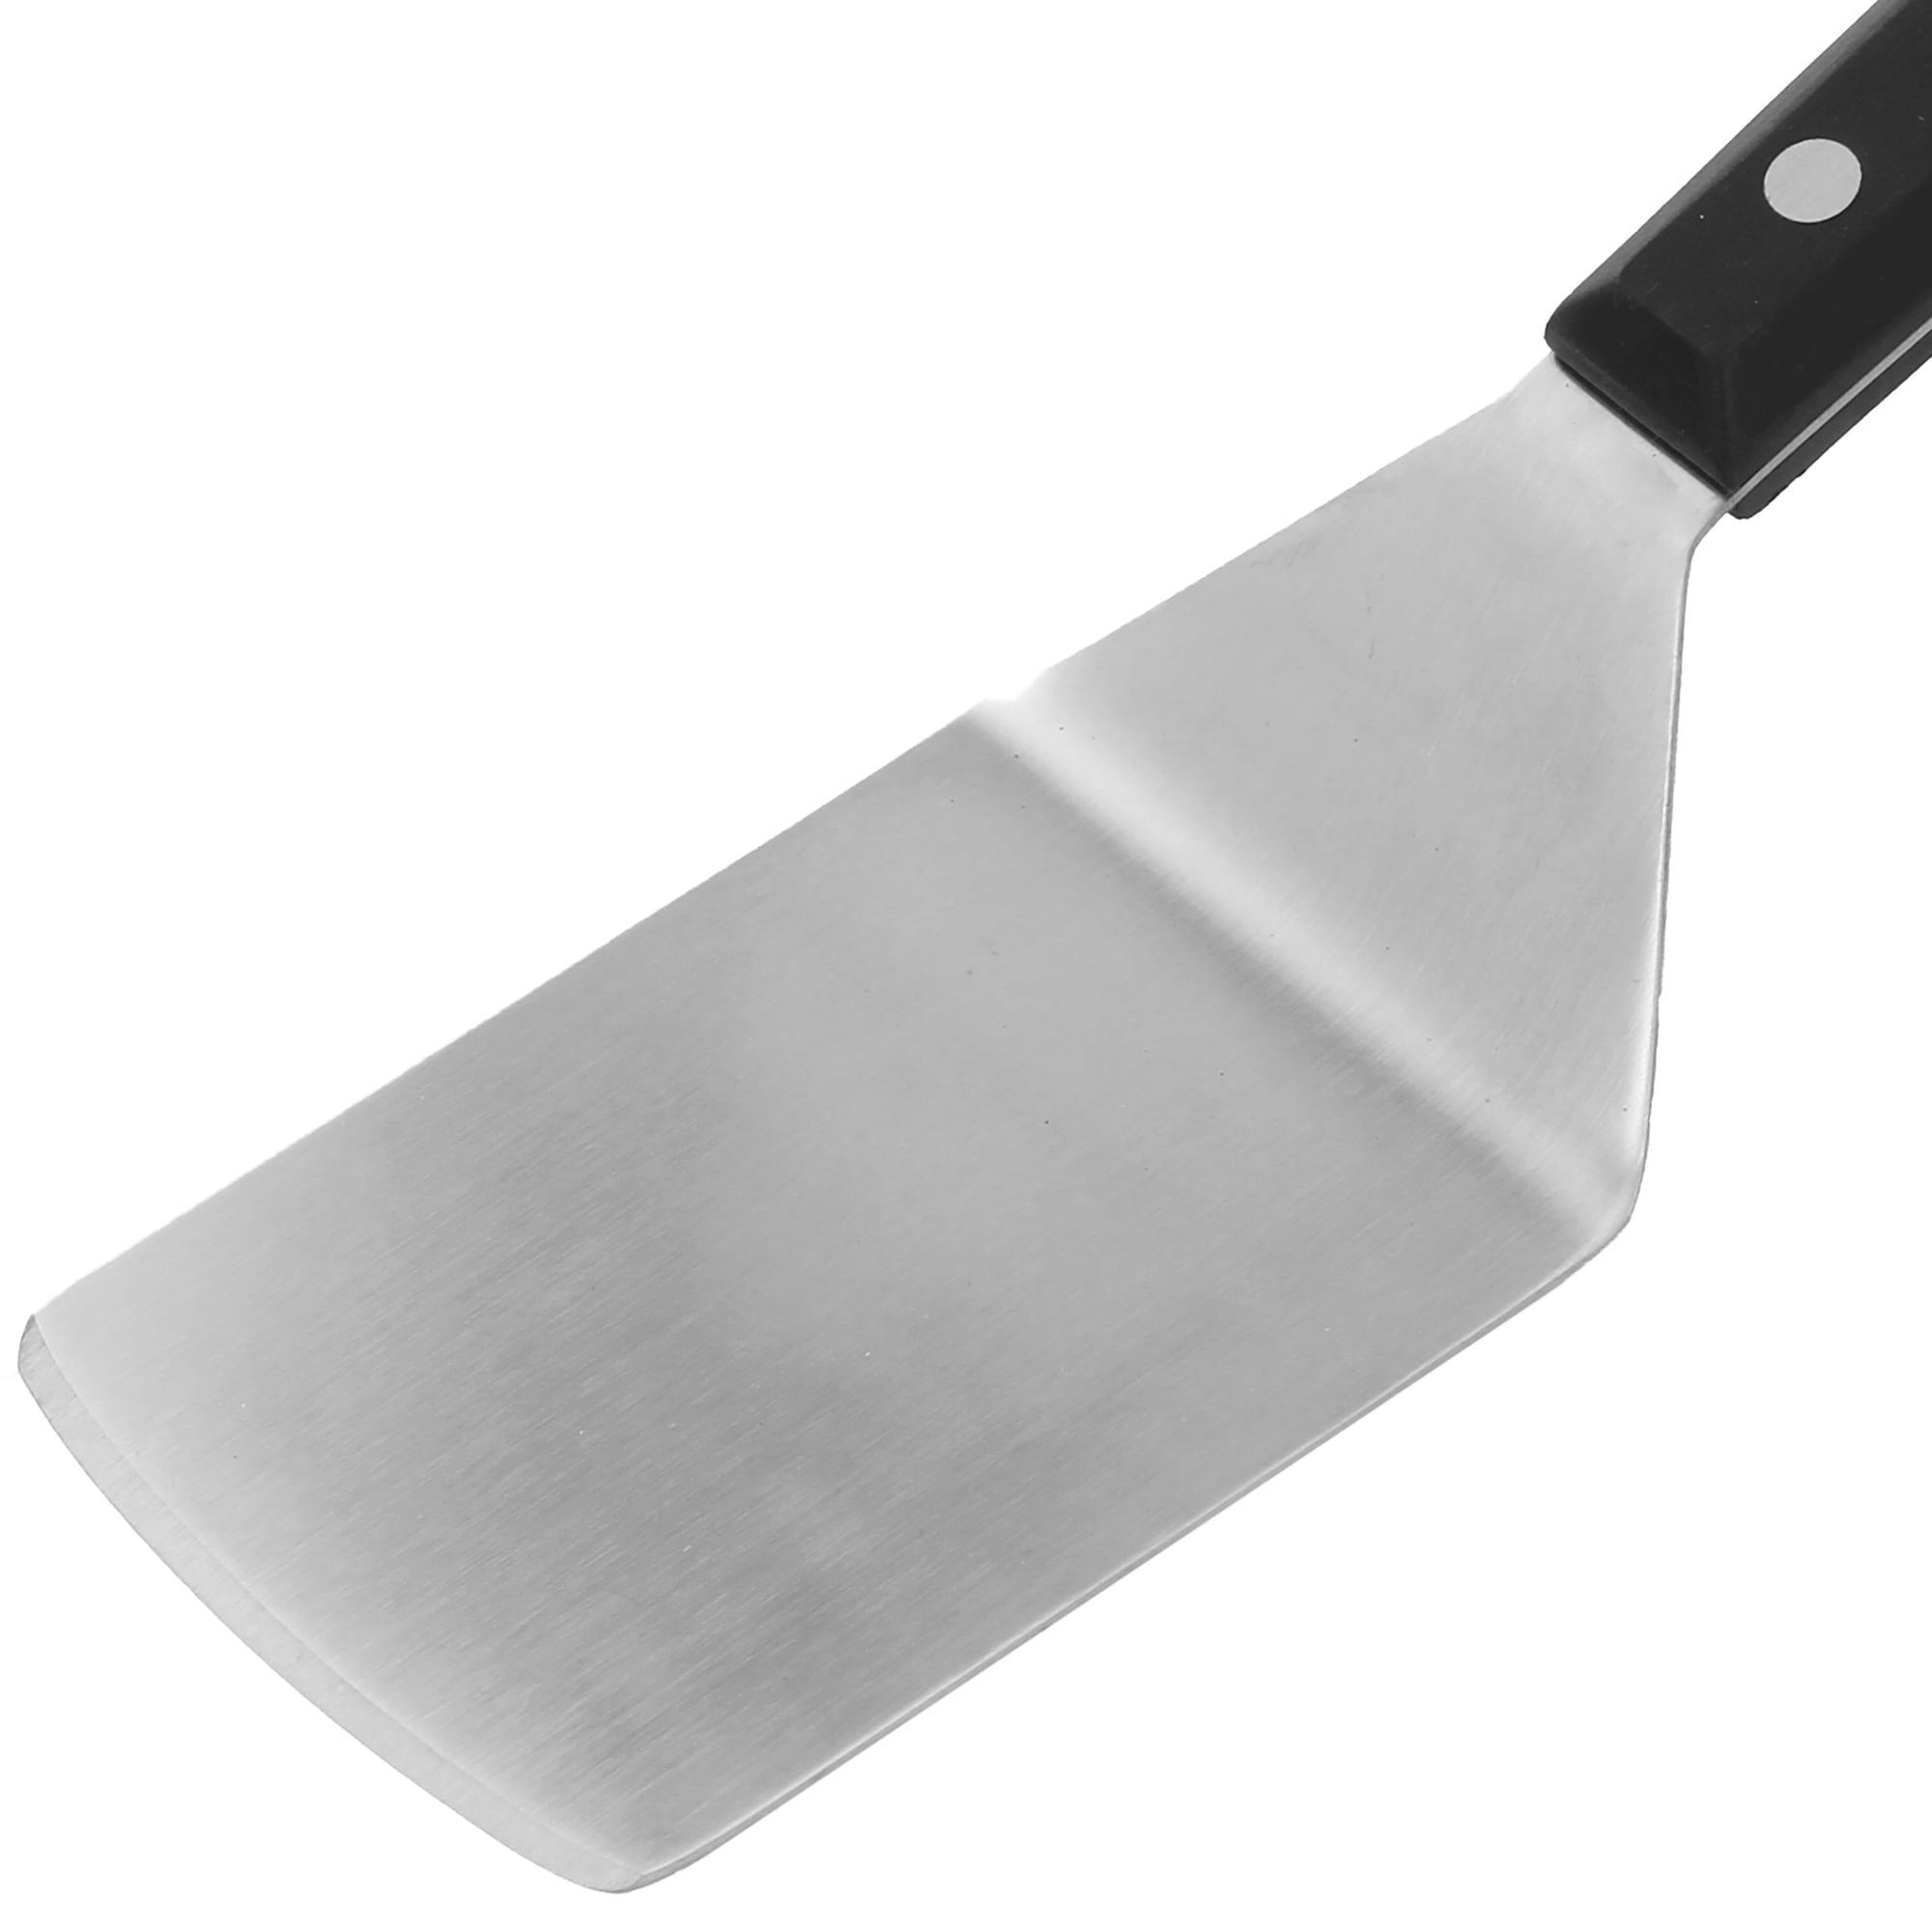 Craft Kitchen Stainless Steel Slotted Turner Spatula with Triple Rivet  Handle 